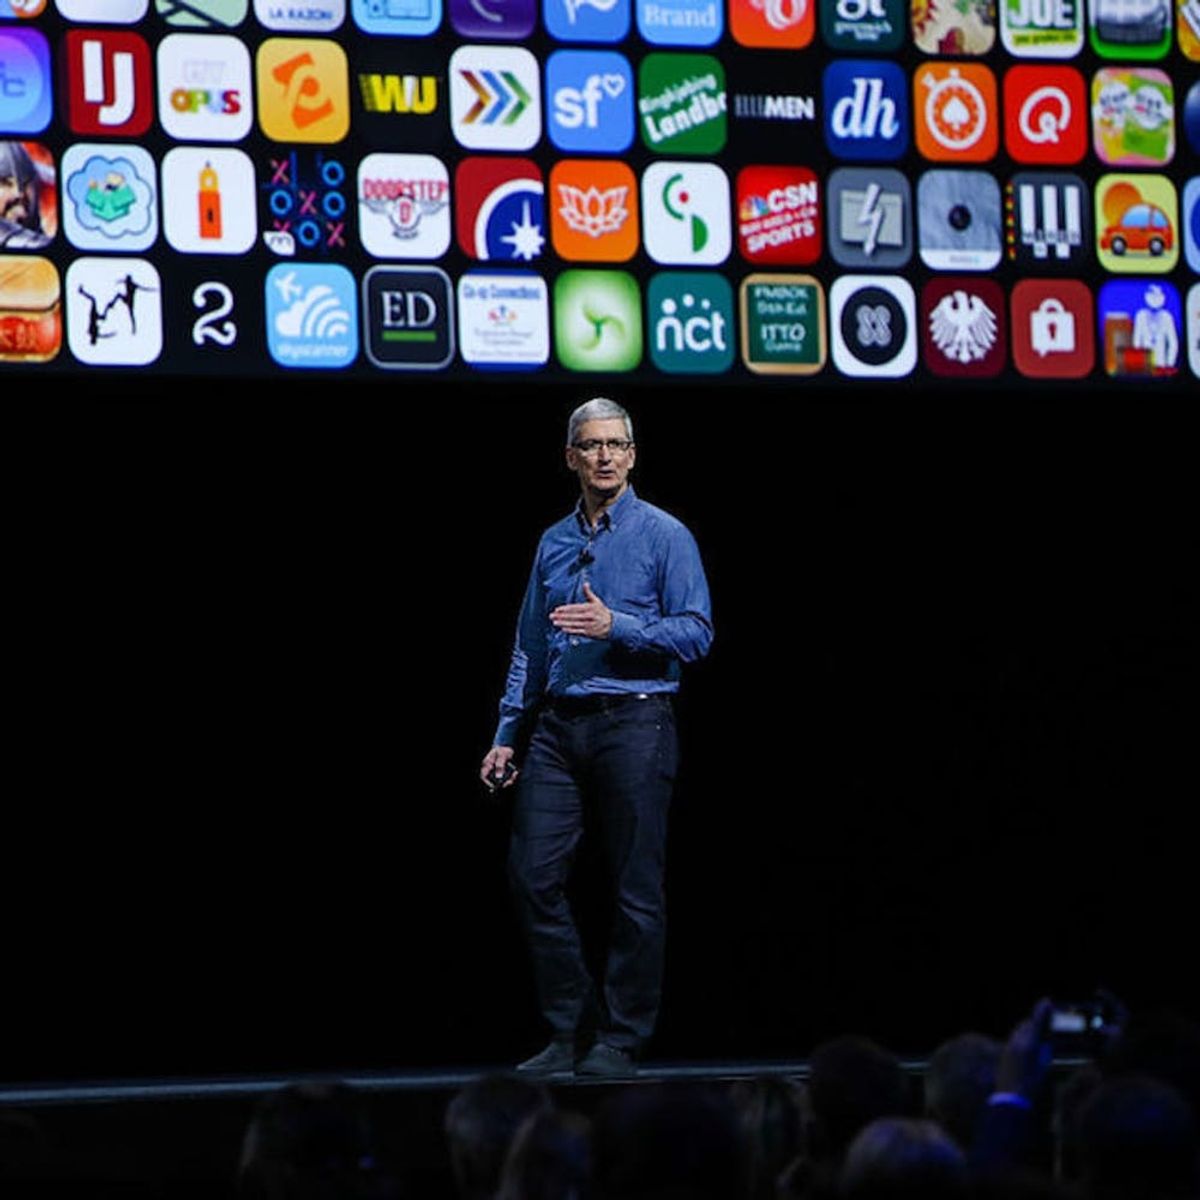 The Most Important Things You Need to Know from WWDC 2016